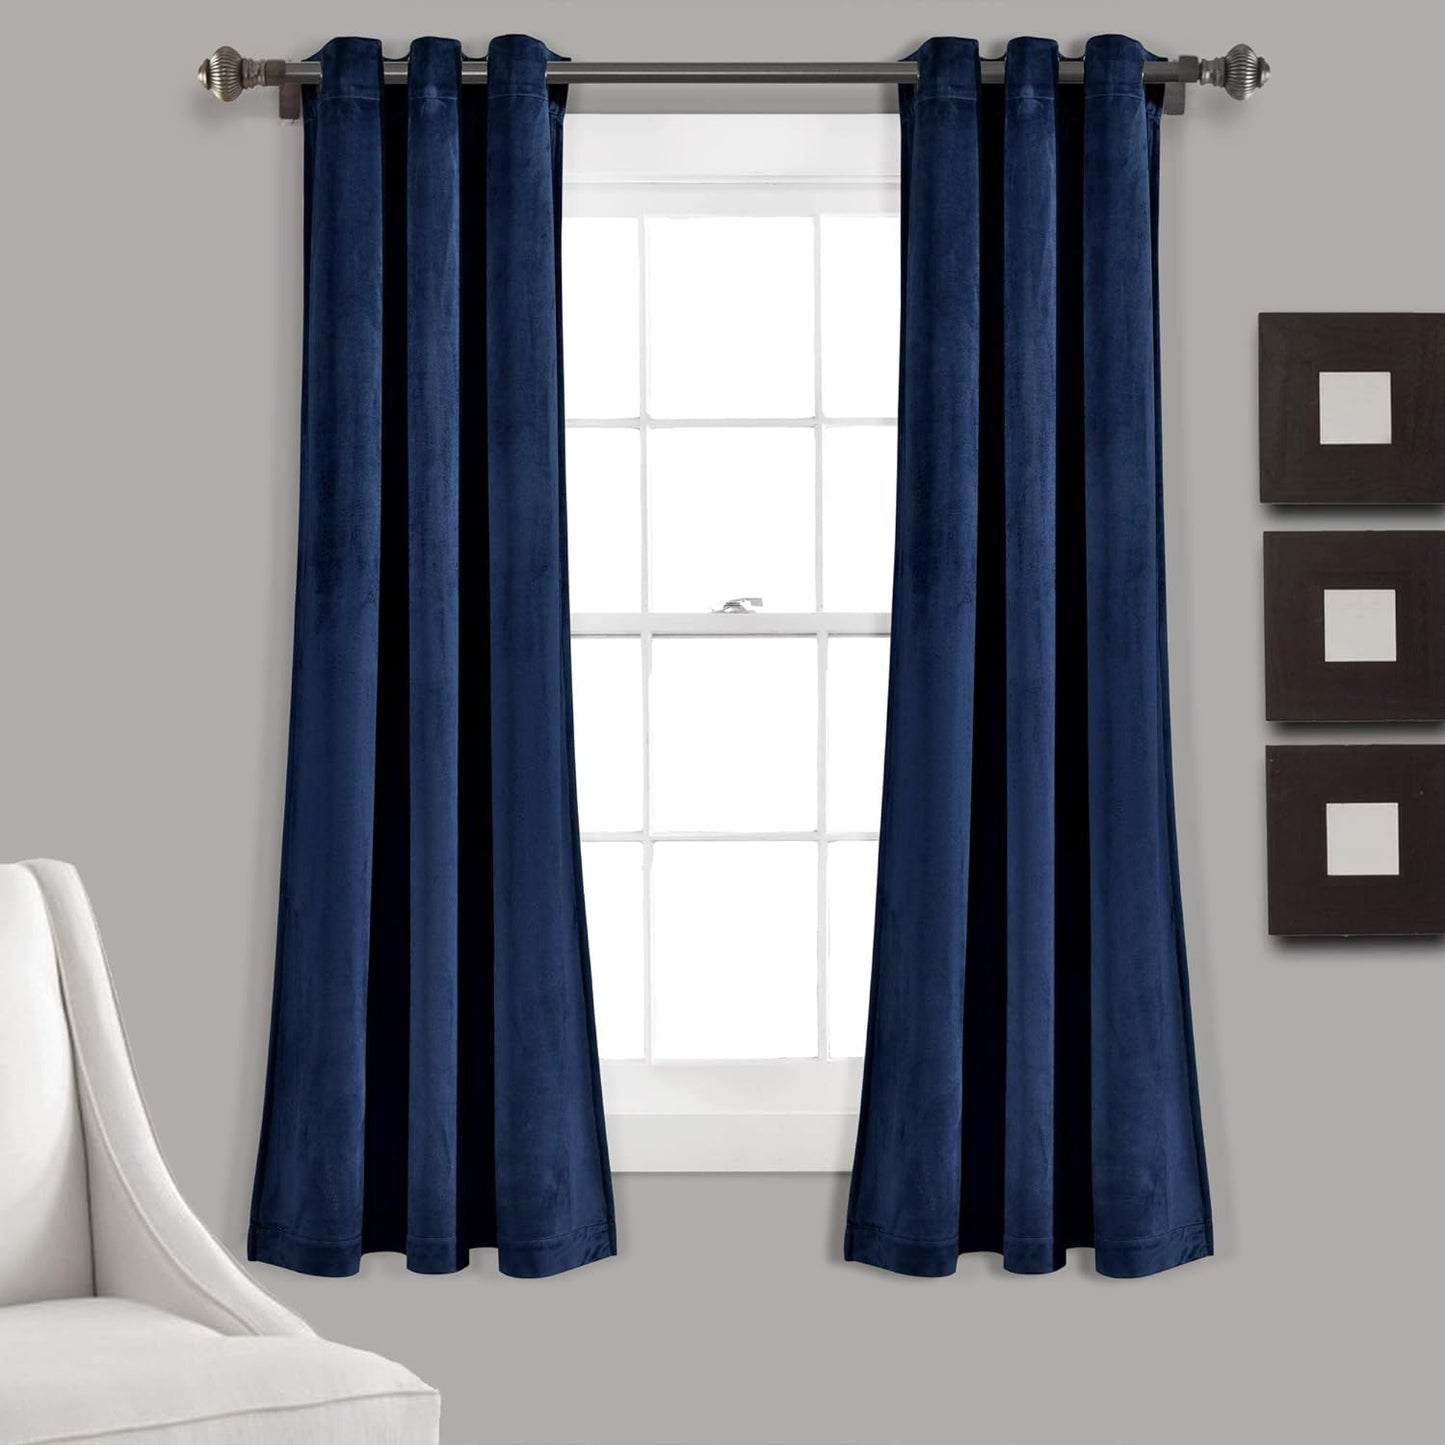 Lush Decor Prima Velvet Curtains Color Block Light Filtering Window Panel Set for Living, Dining, Bedroom (Pair), 38" W X 84" L, Navy  Triangle Home Fashions Navy Room Darkening 38"W X 63"L